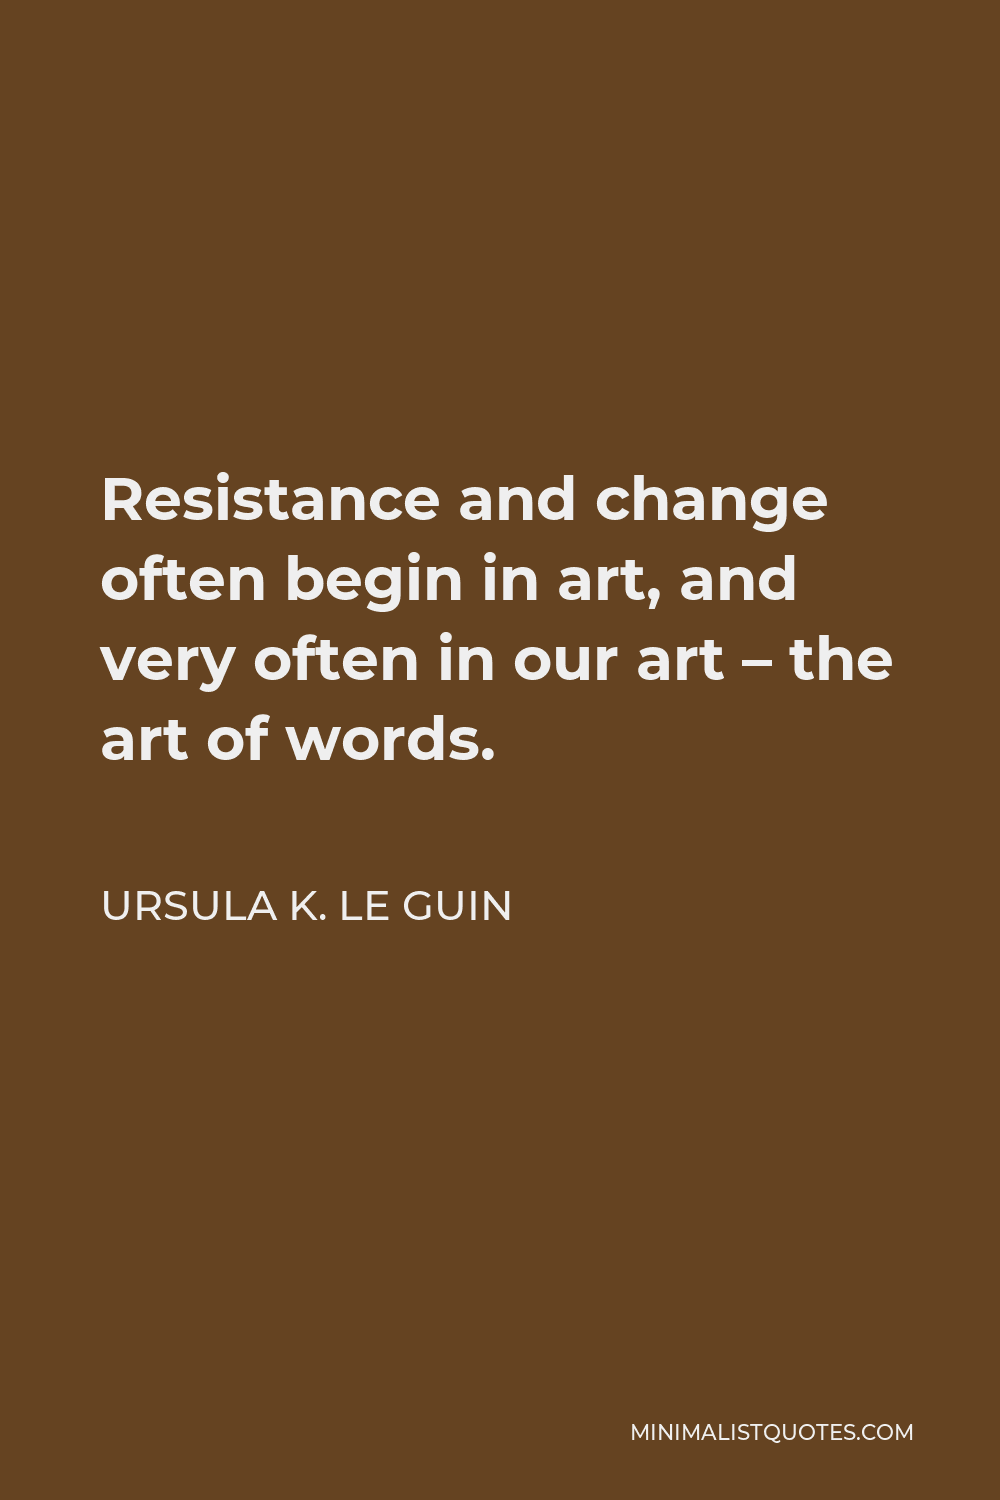 Ursula K. Le Guin Quote - Resistance and change often begin in art, and very often in our art – the art of words.